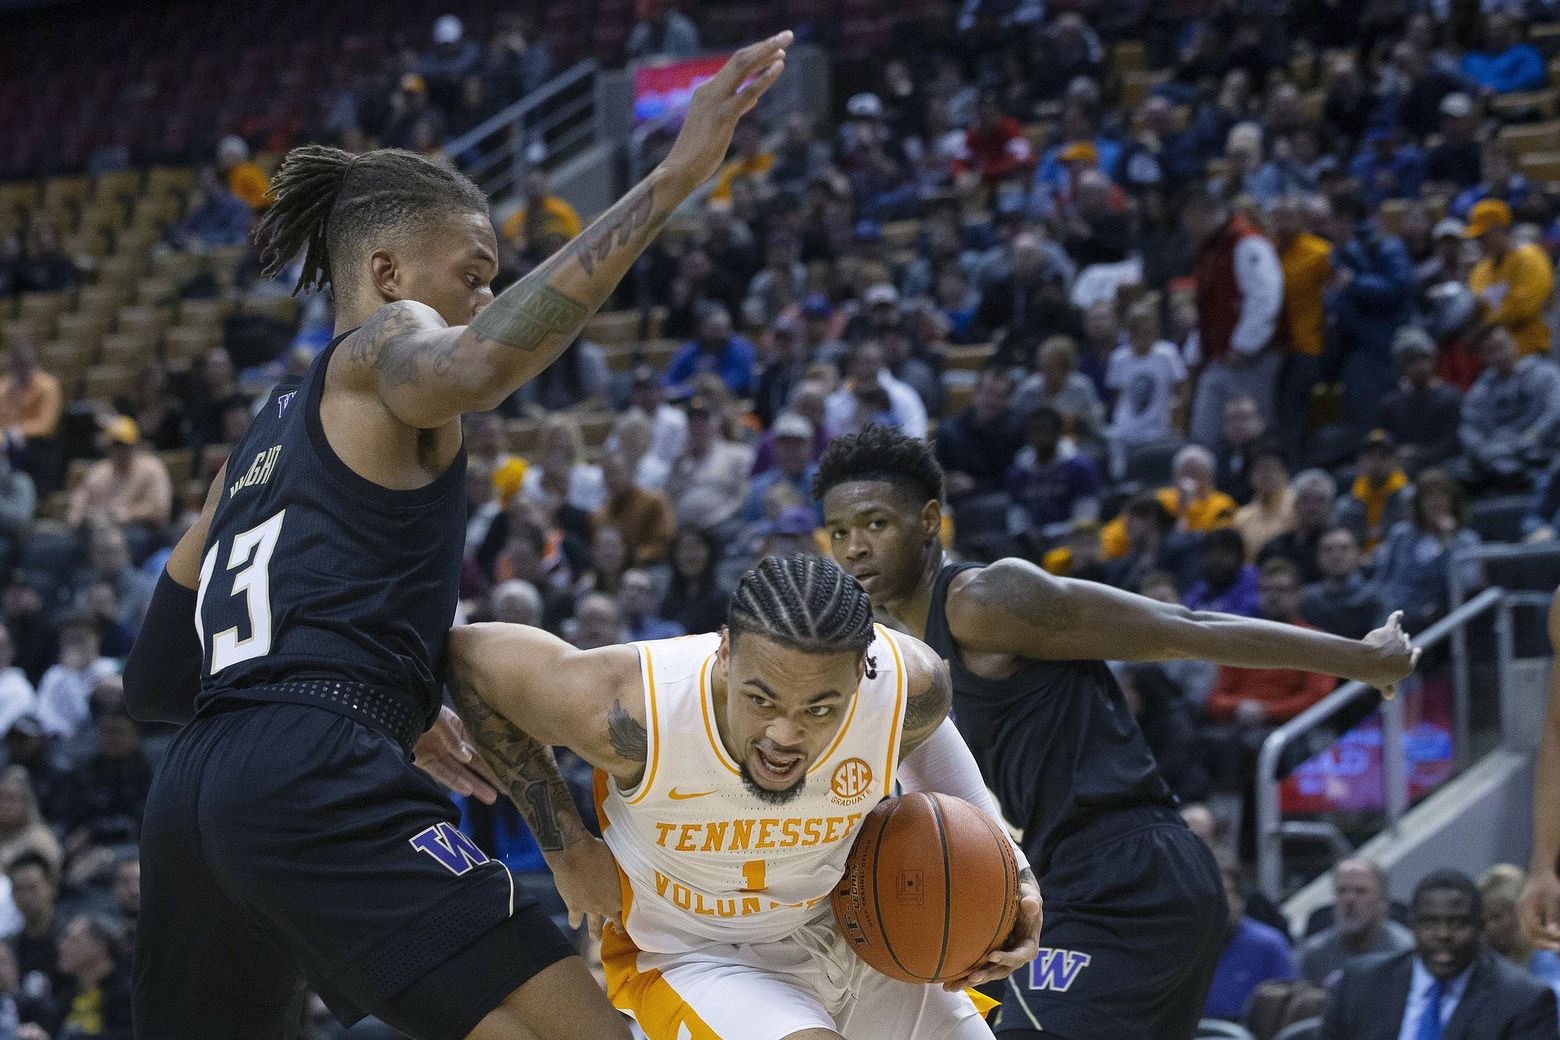 The Official #20 Tennessee vs. Alabama State Game Thread ...